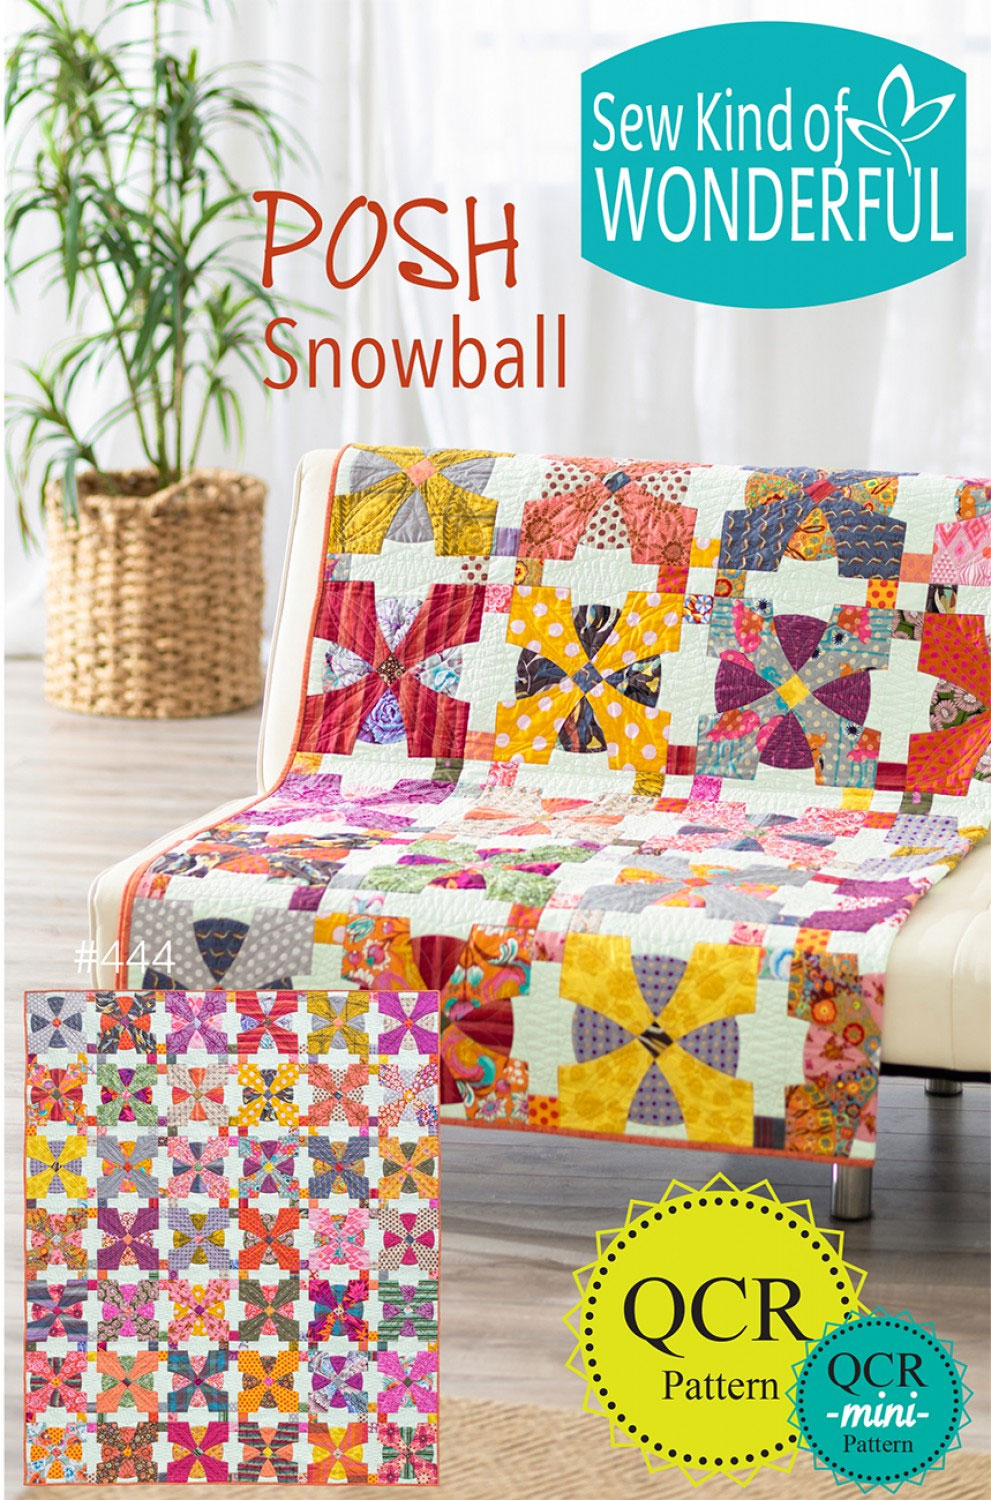 Posh-snowball-quilt-sewing-pattern-sew-kind-of-wonderful-front